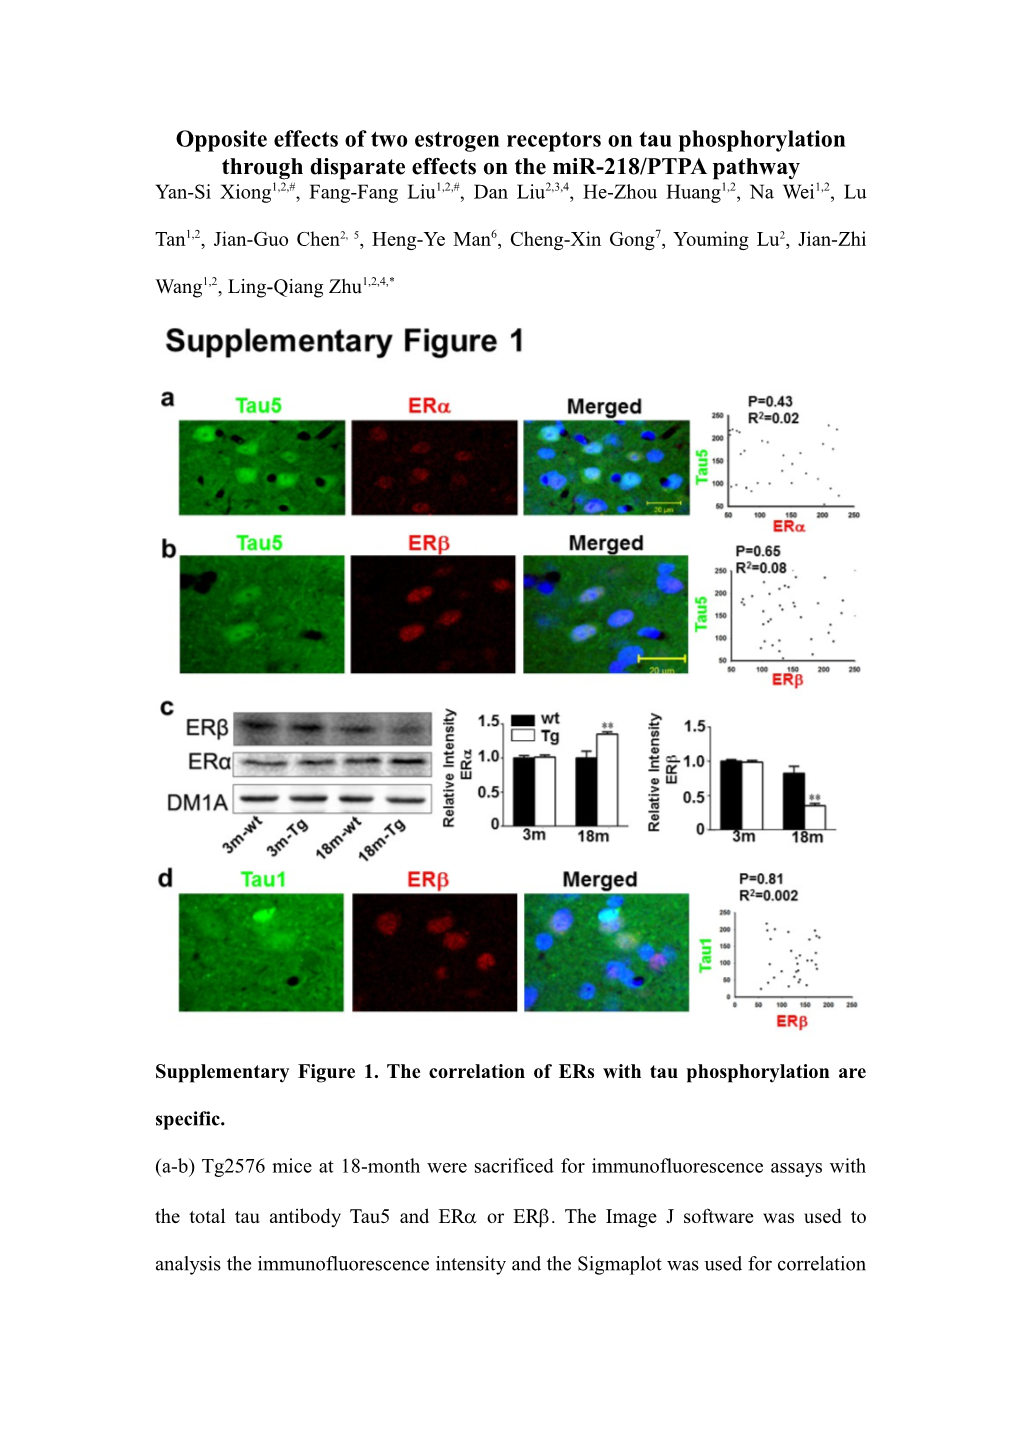 Supplementary Figure 1. the Correlation of Ers with Tau Phosphorylation Are Specific